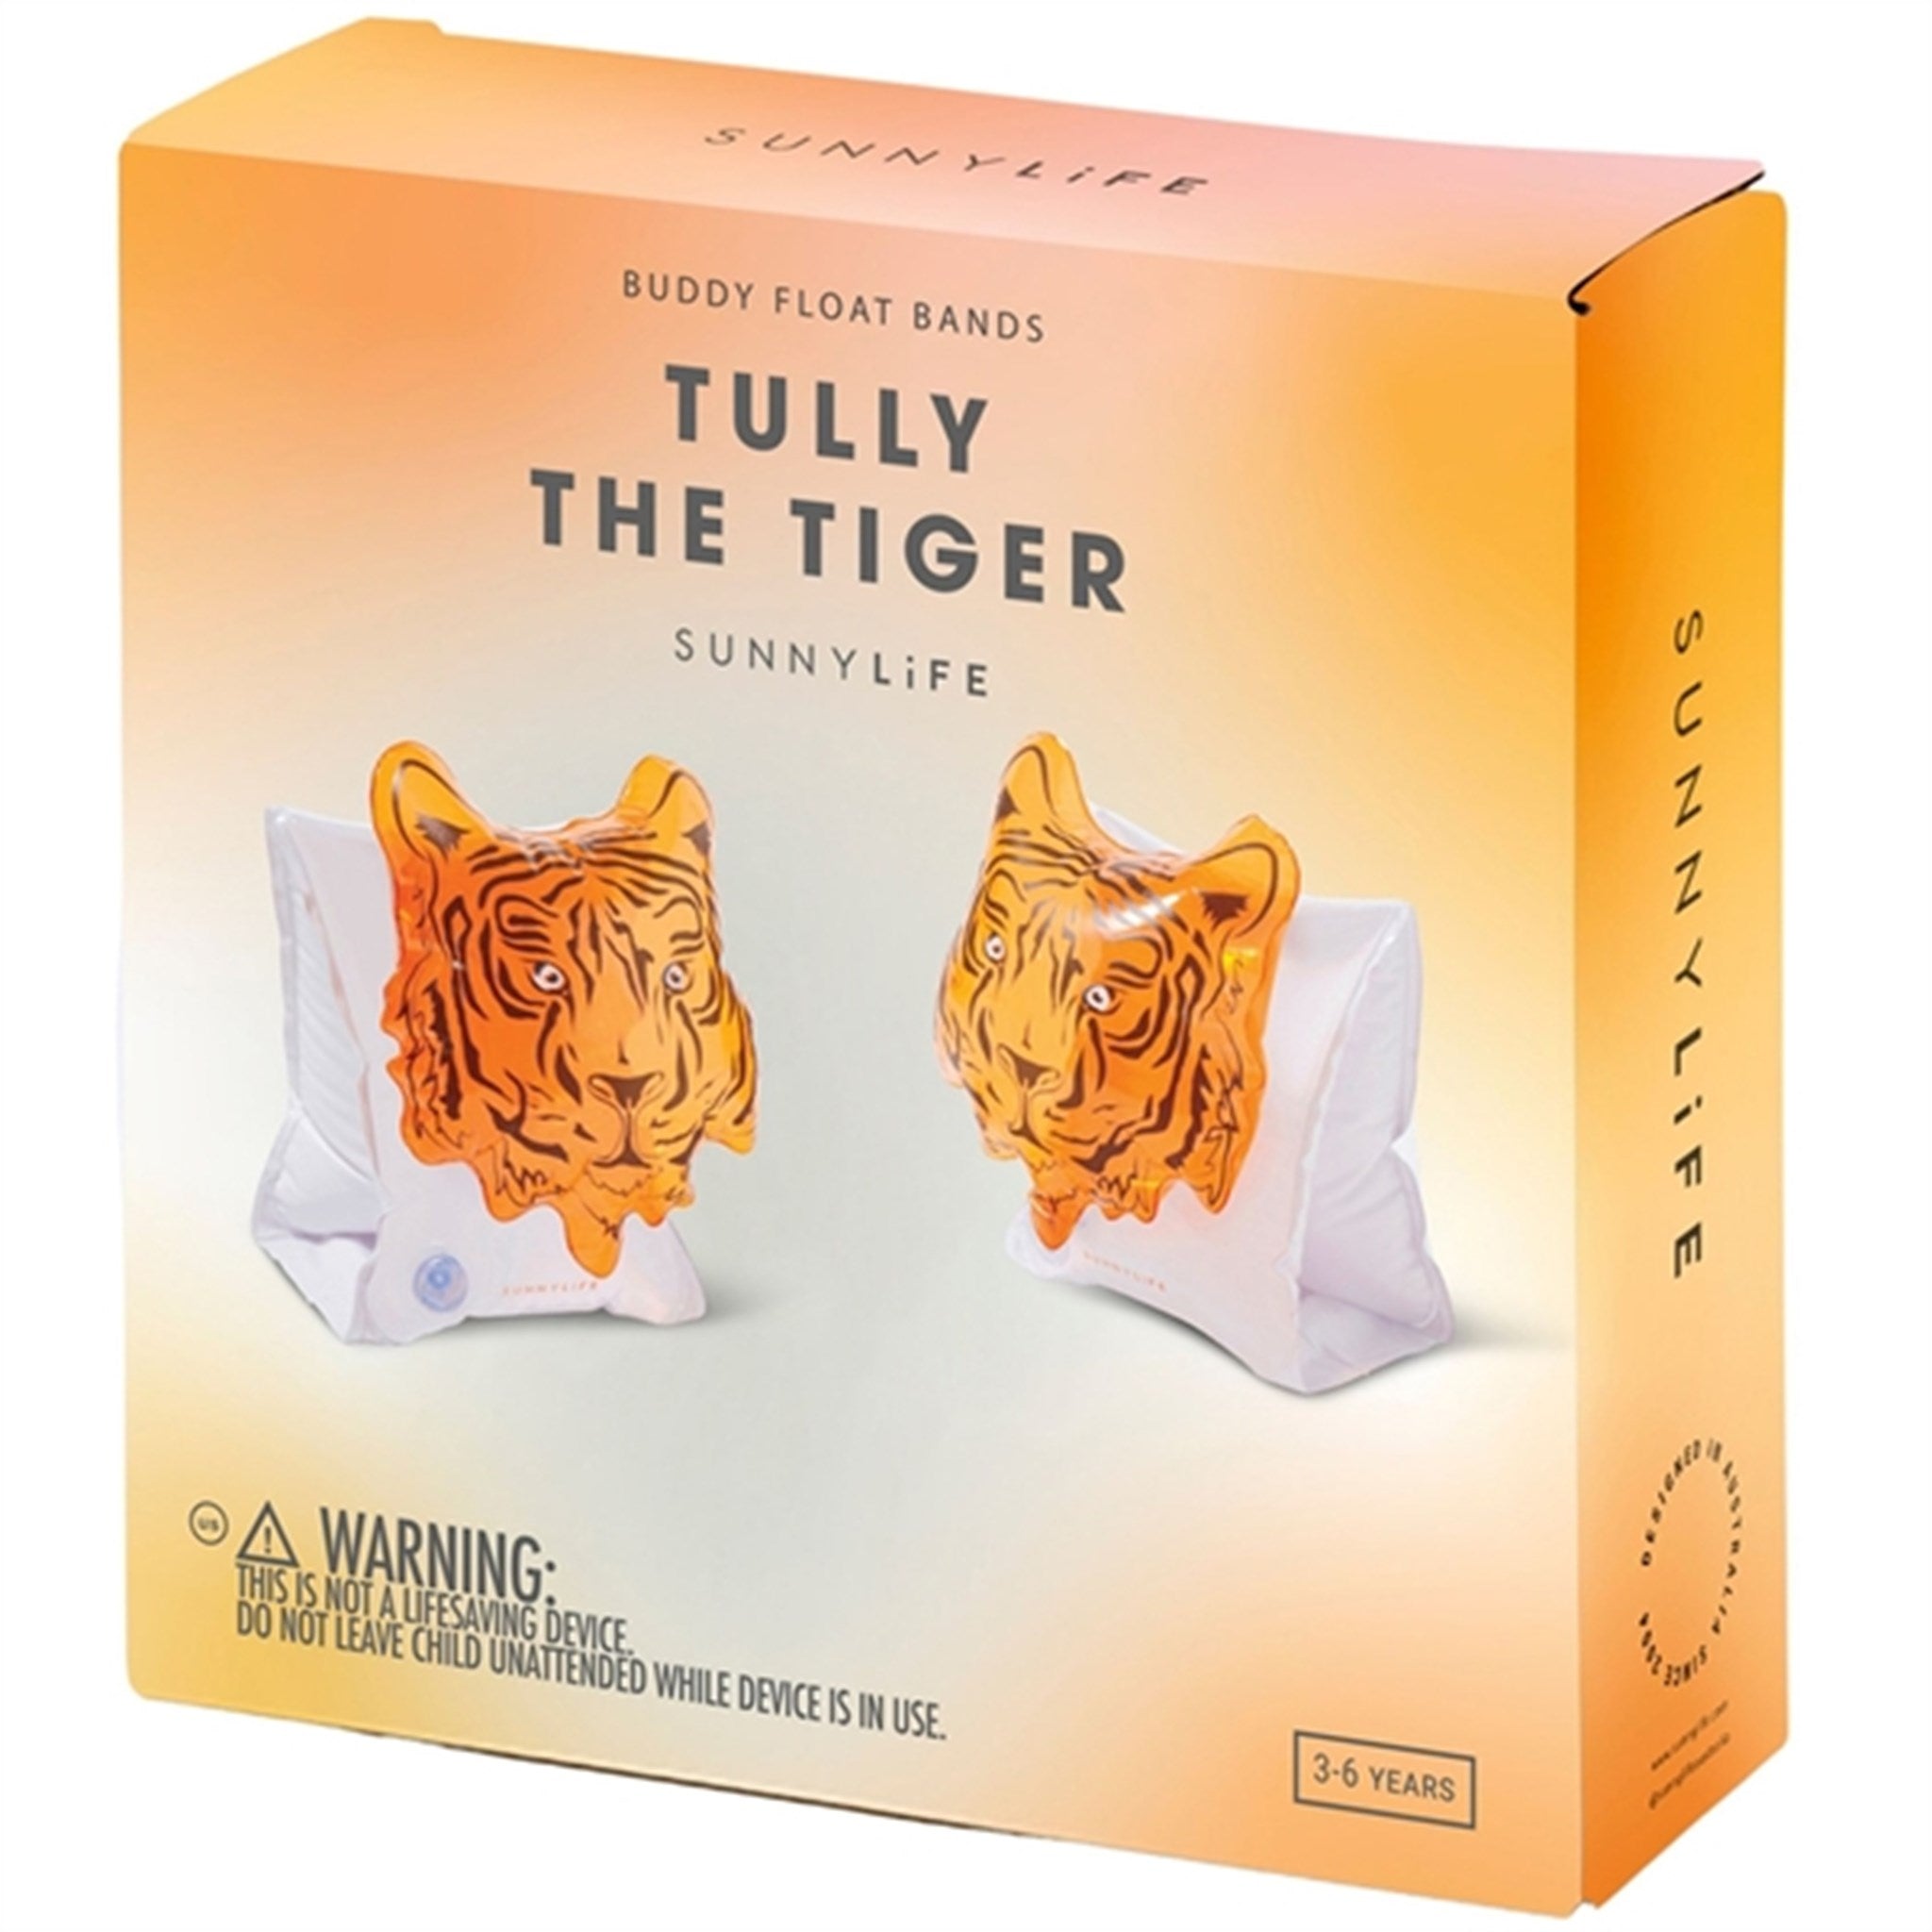 SunnyLife Buddy Float Bands Tully the Tiger 2